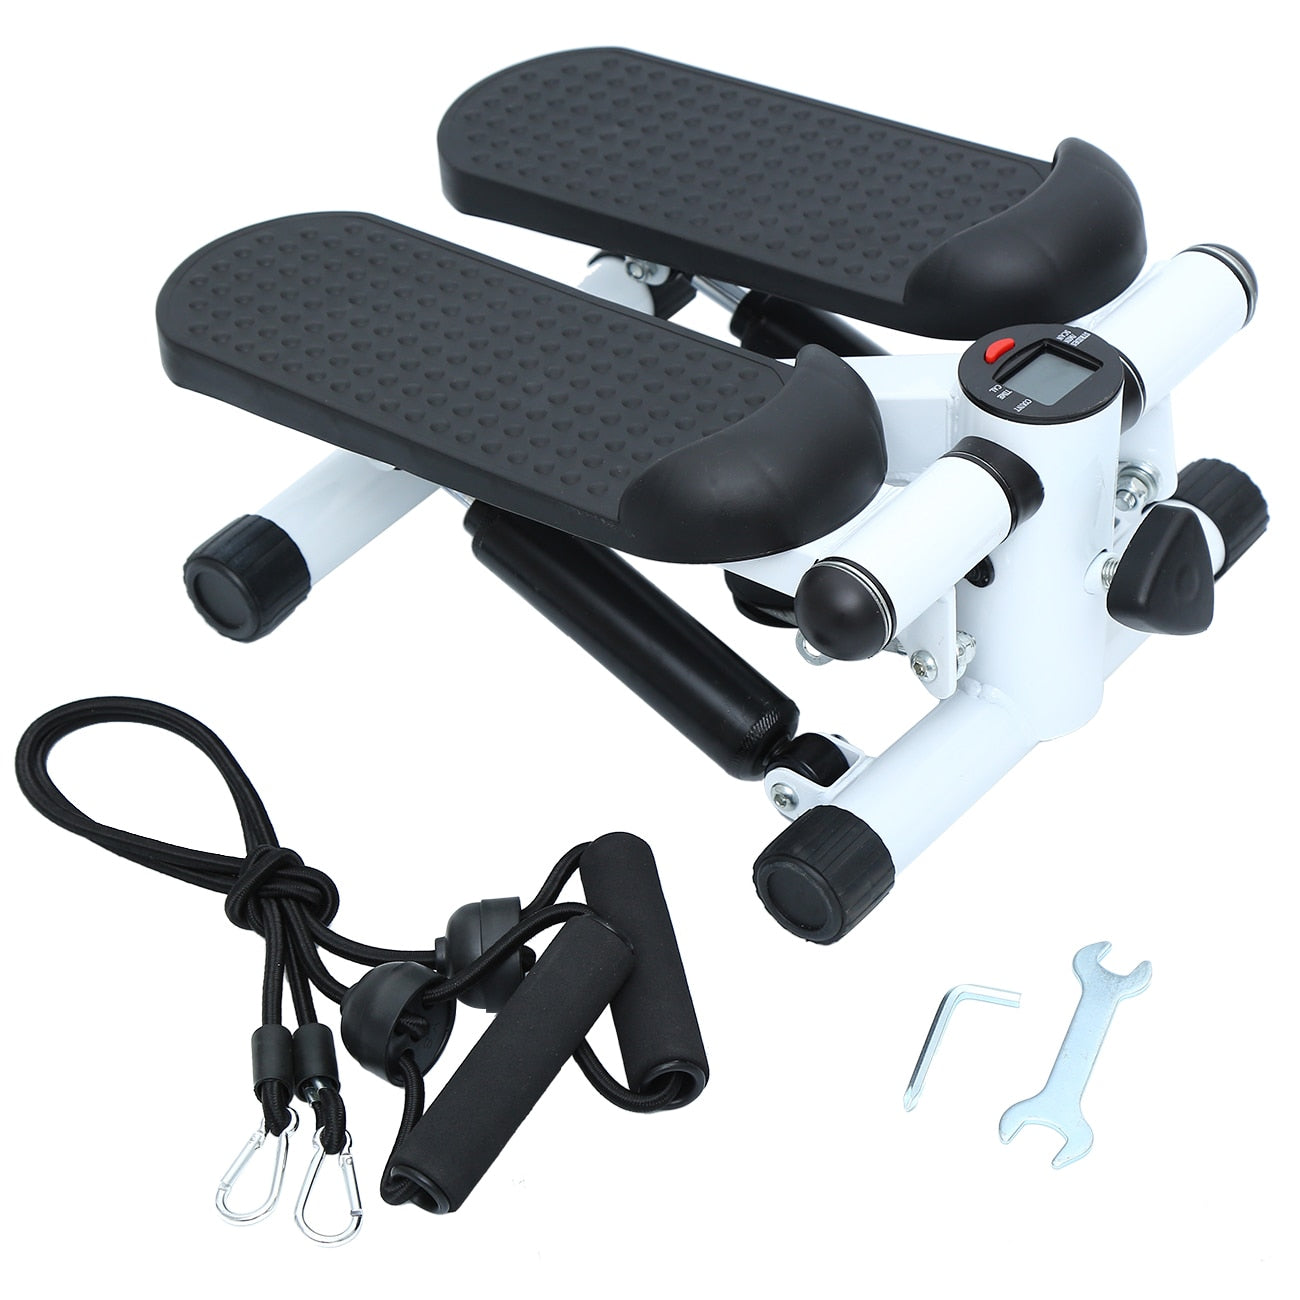 Yonntech Swing Side Stepper LCD Display Expander Aerobic Fitness Step Exercise Machine Equipment